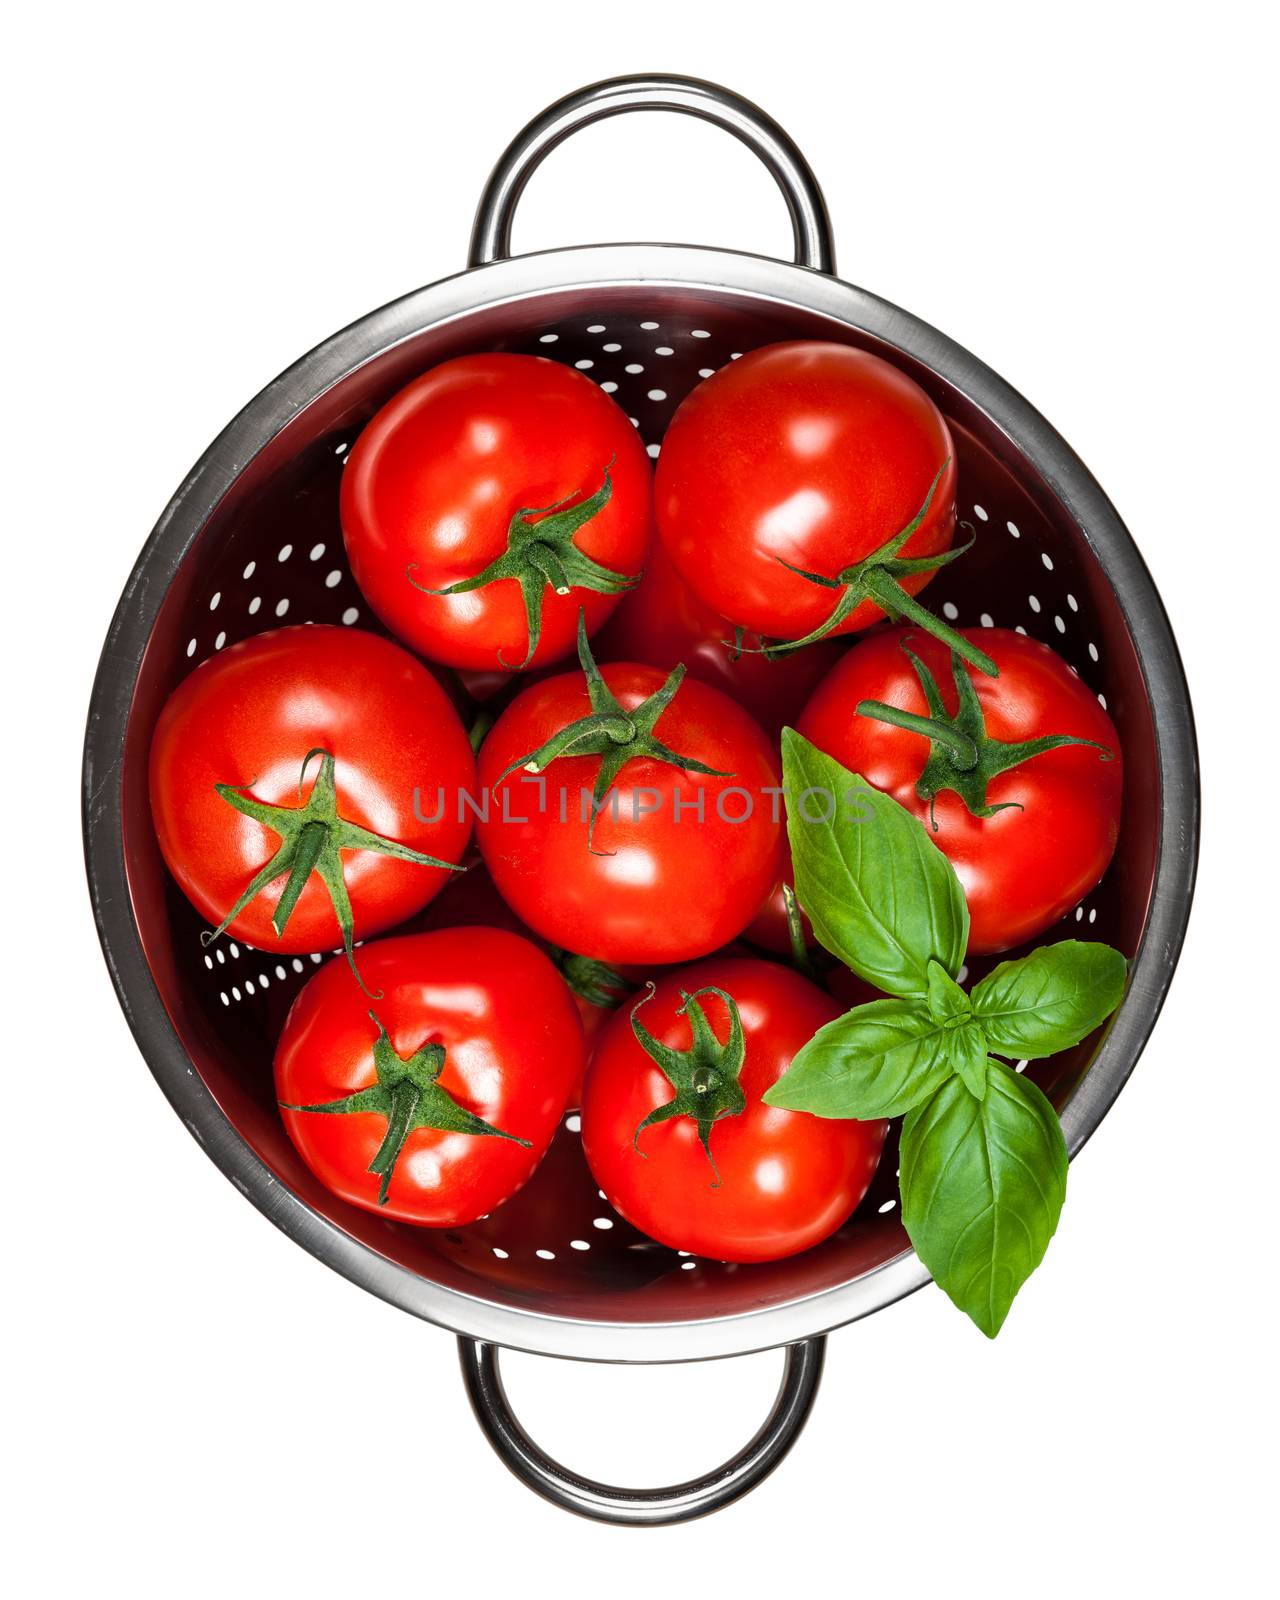 Tomatoes with basil in colander isolated on white background. Top view